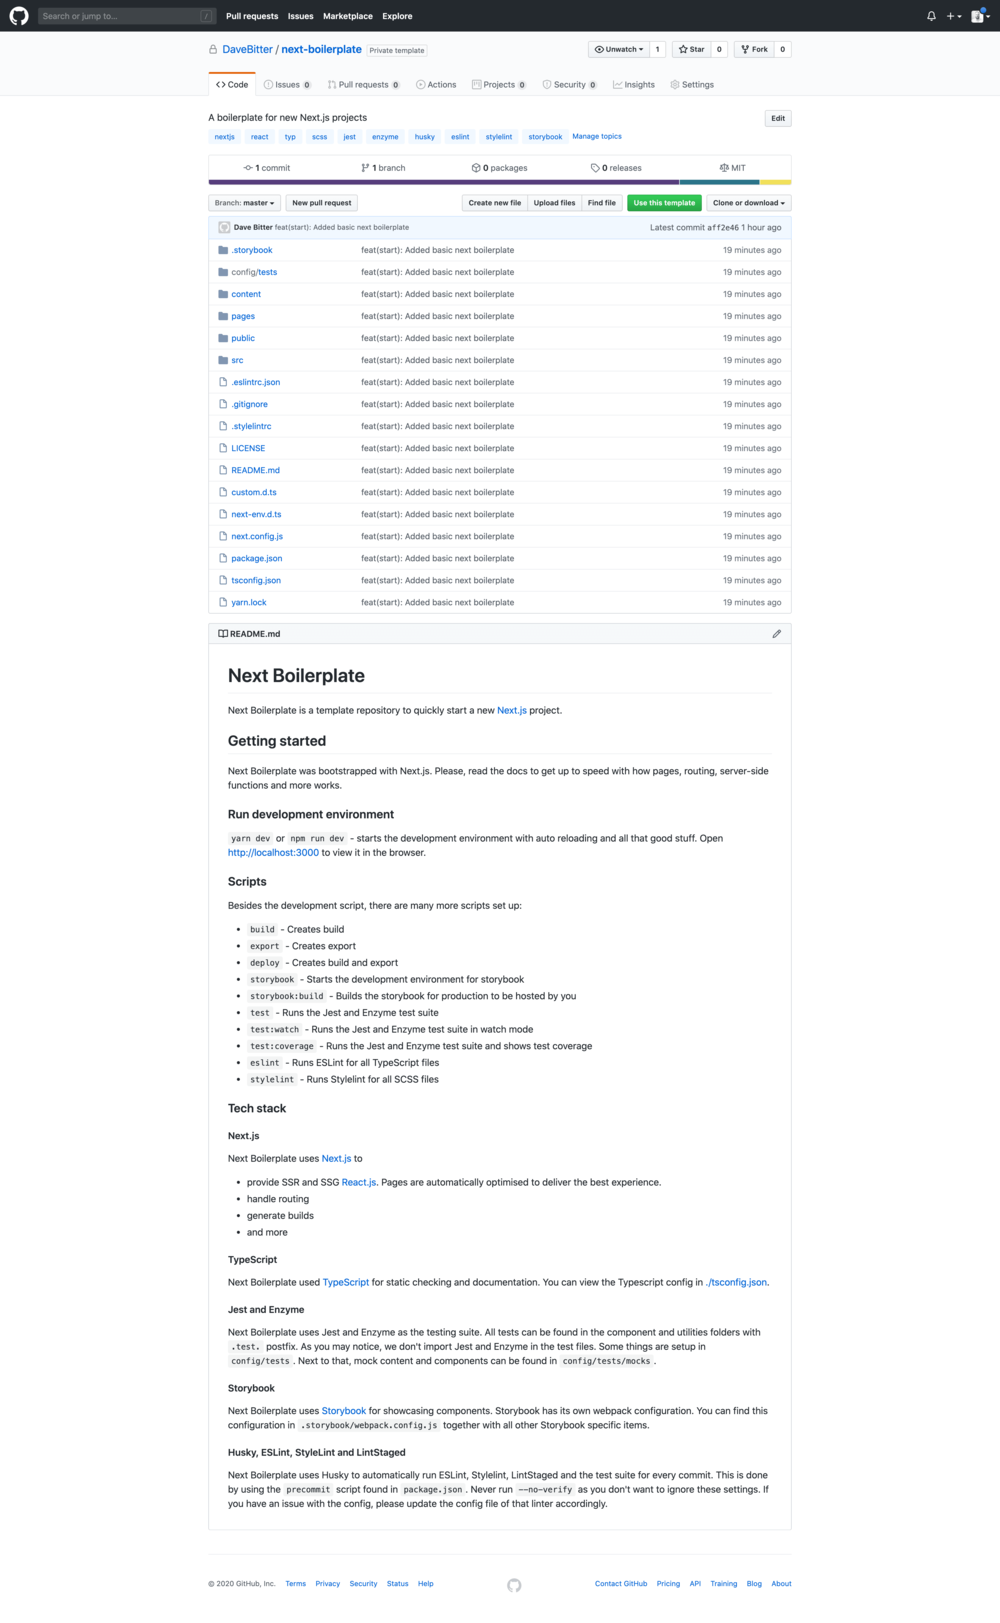 /img/articles/next-boilerplate-repository.png